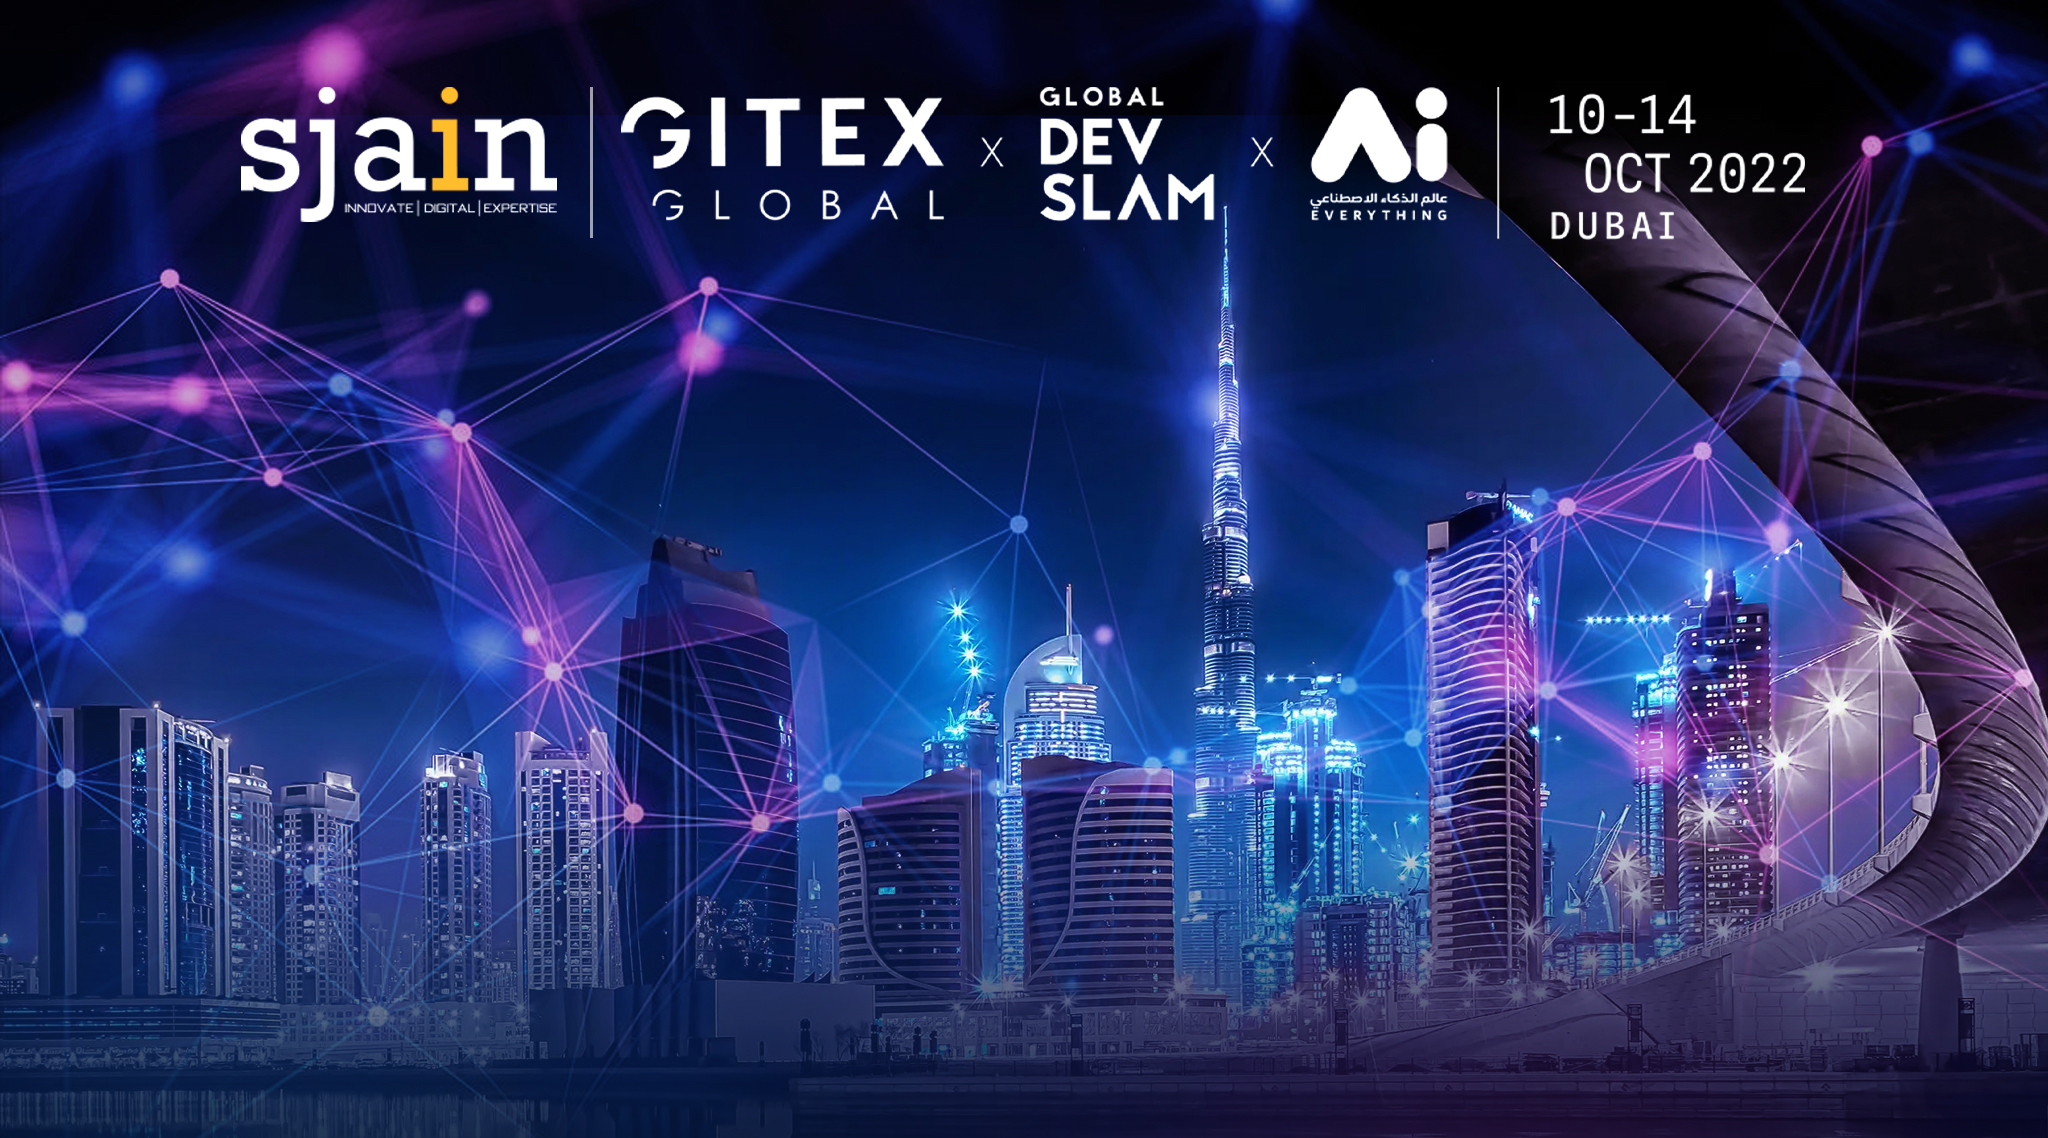 Sjain Ventures is all set to seize the opportunity in GITEX 2022